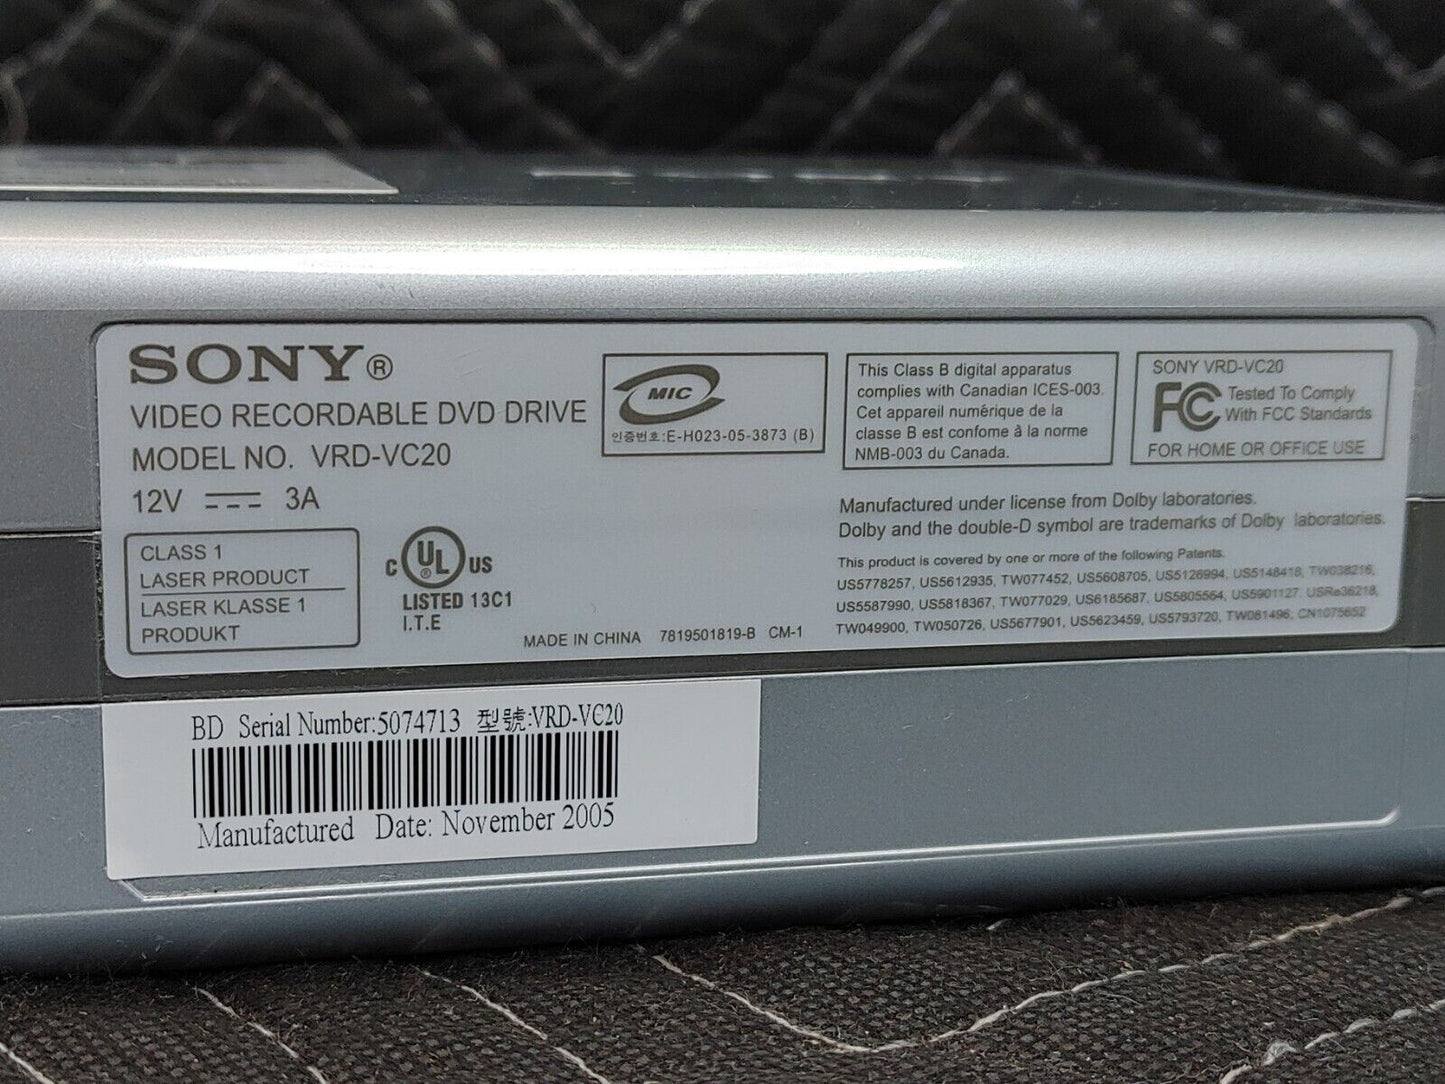 SONY VRD-VC20 DVDirect VCR to DVD Converter Video Recordable DVD Drive